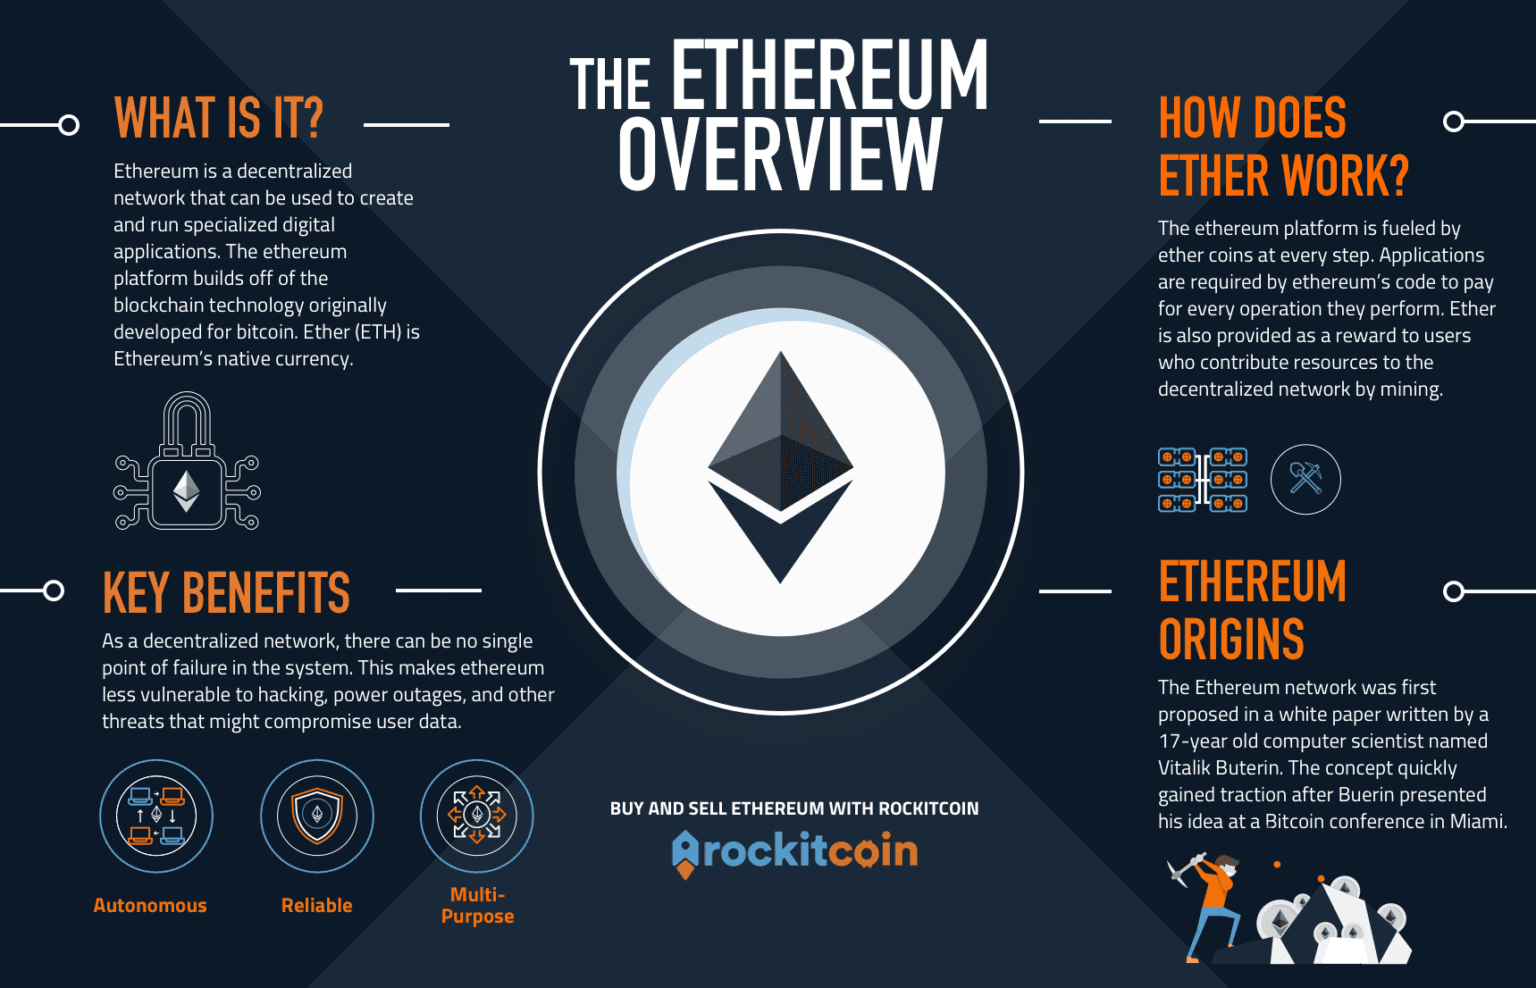 whats happening to ethereum